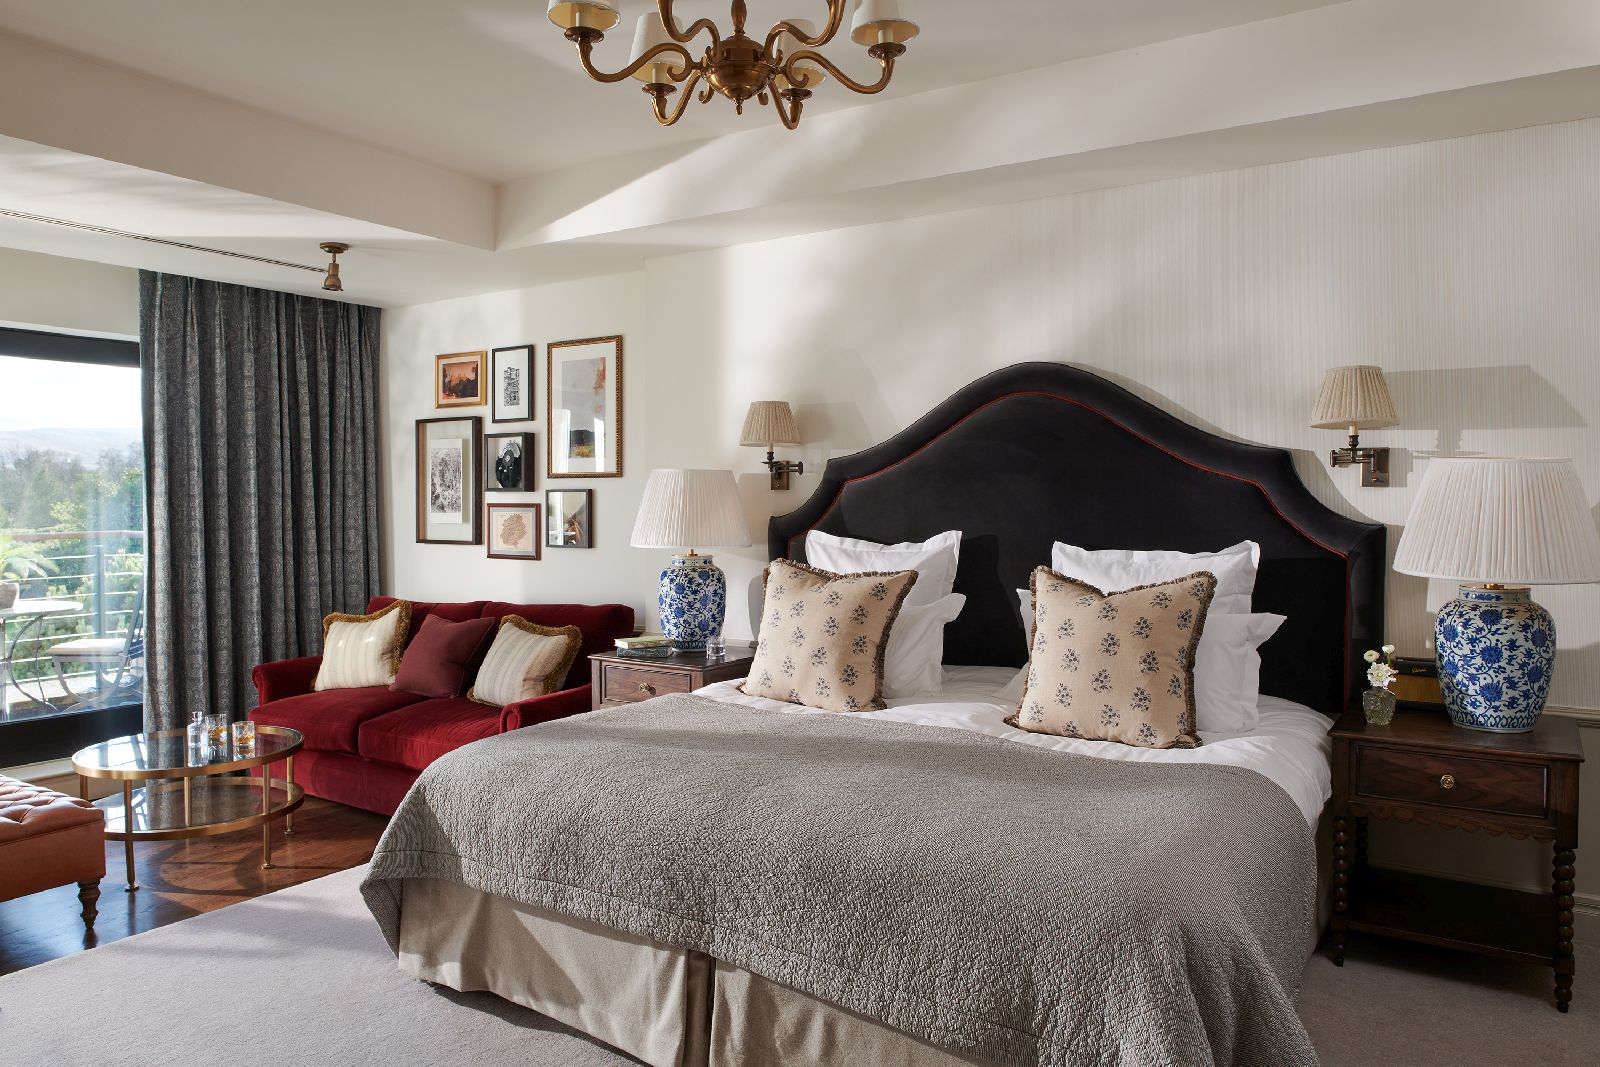 A luxurious Estate Room at The Gleneagles Hotel in Scotland